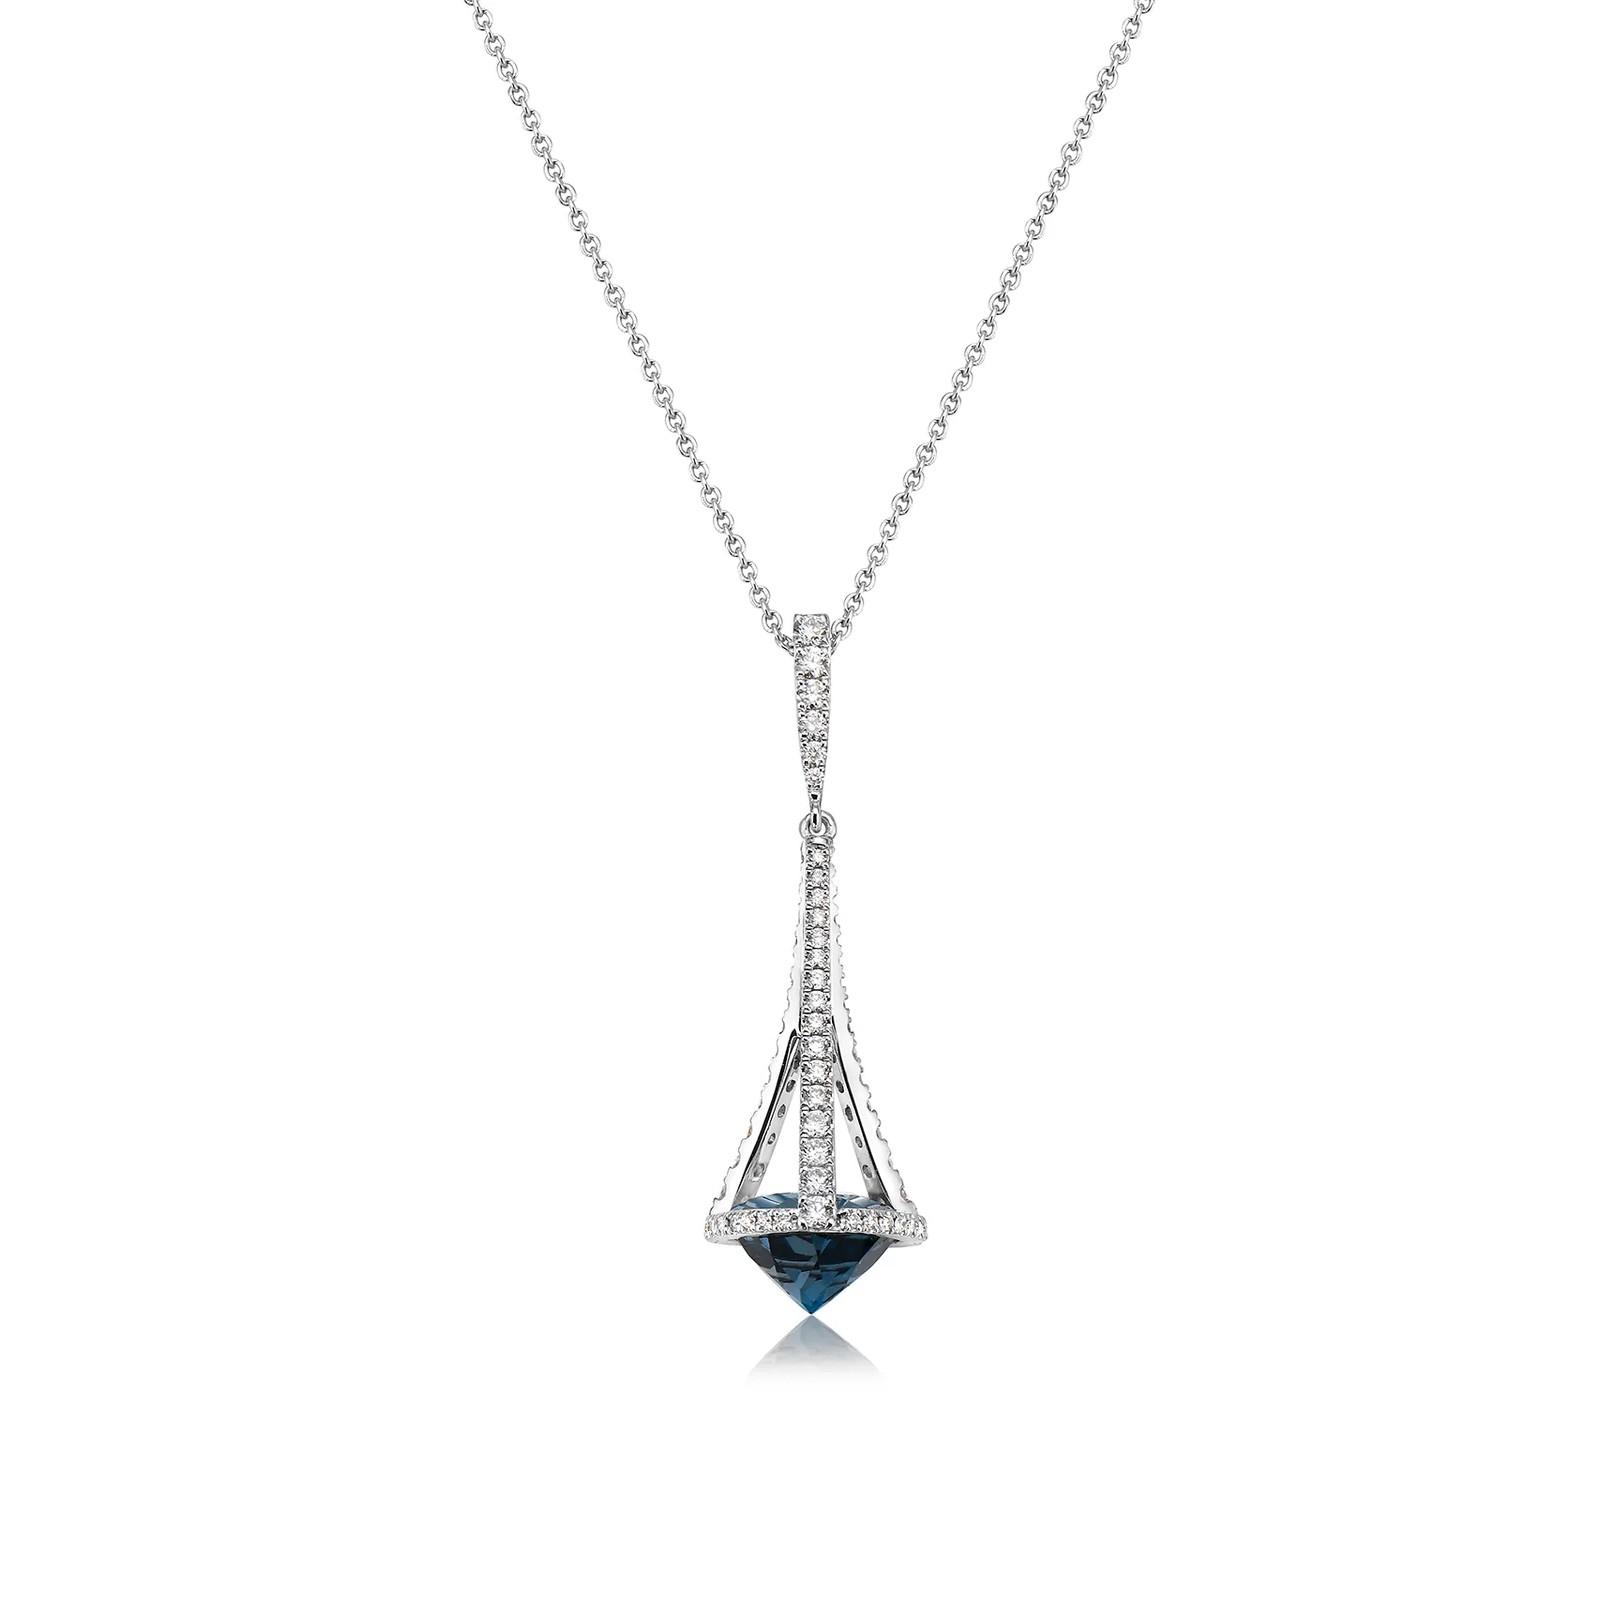 Charles Krypell London Blue Topaz and Diamond Chandelier Pendant Necklace 0